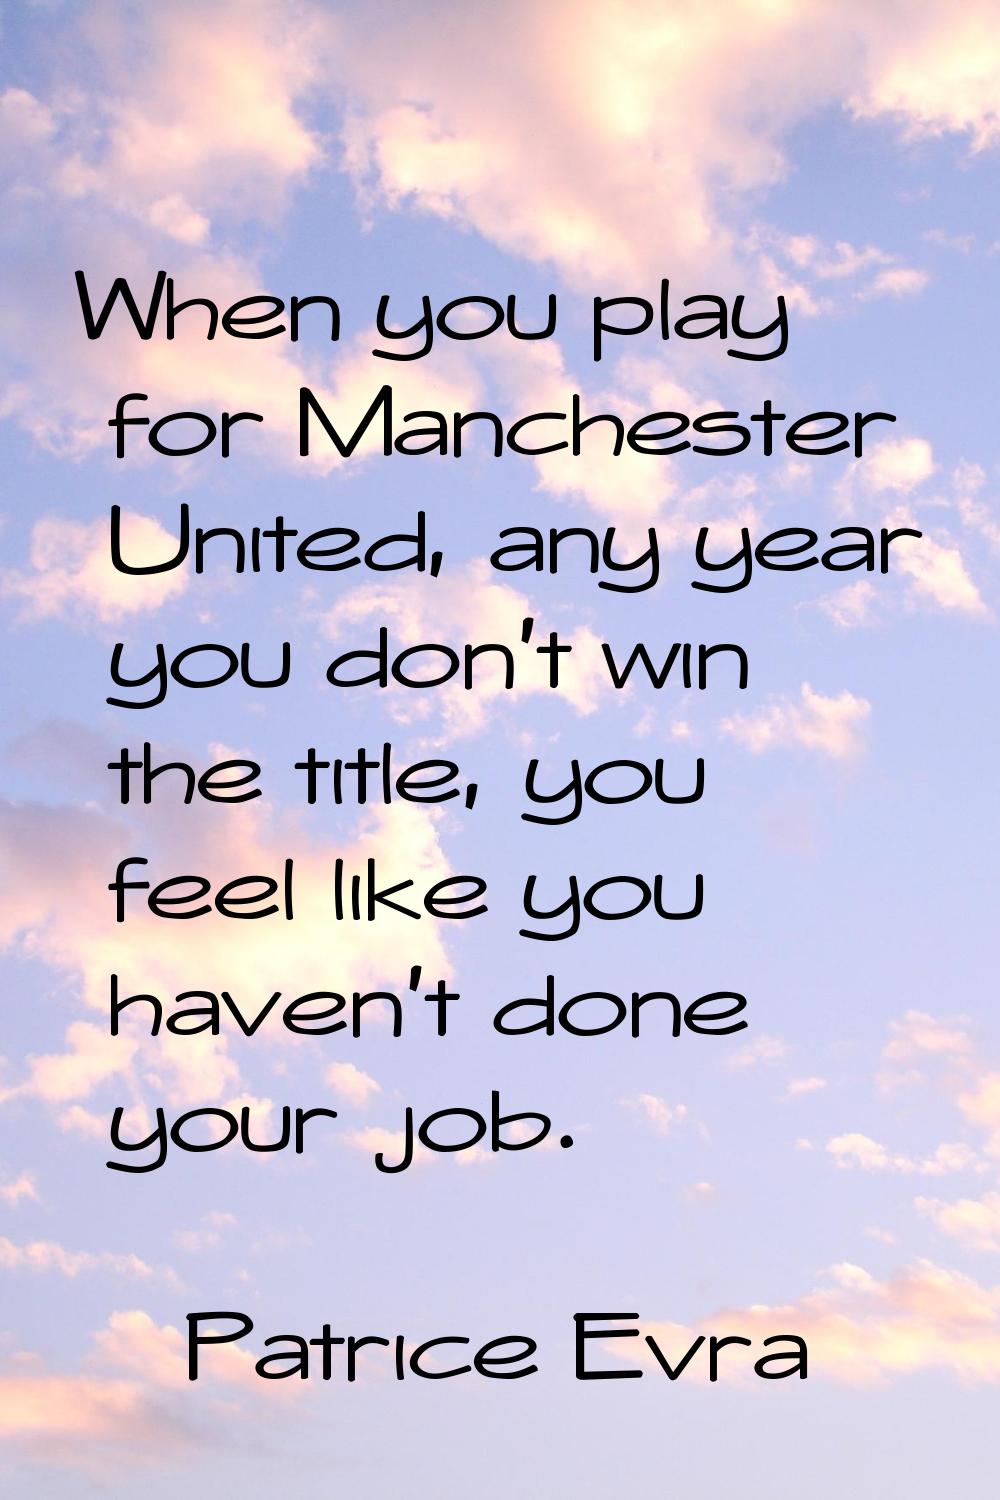 When you play for Manchester United, any year you don't win the title, you feel like you haven't do